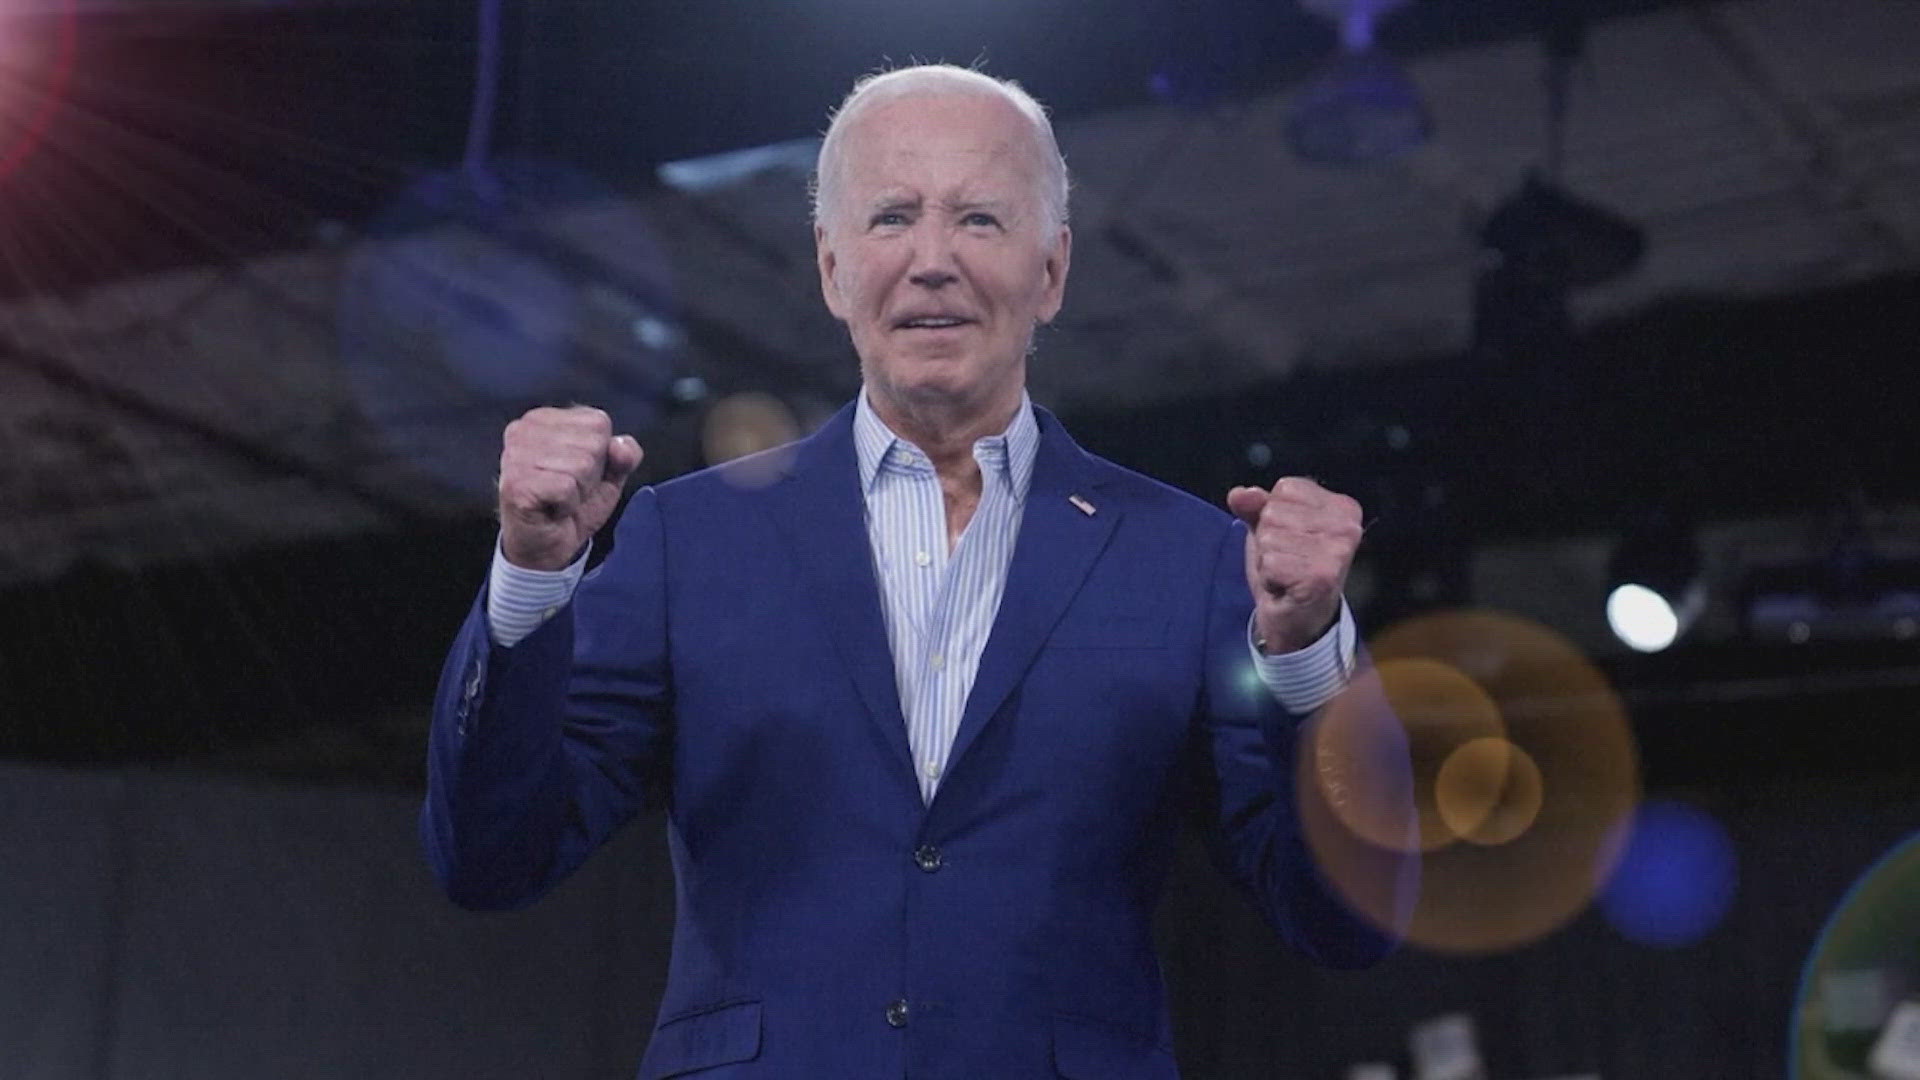 The White House says they are making preparations for Friday's interview with ABC News after Biden's debate performance.